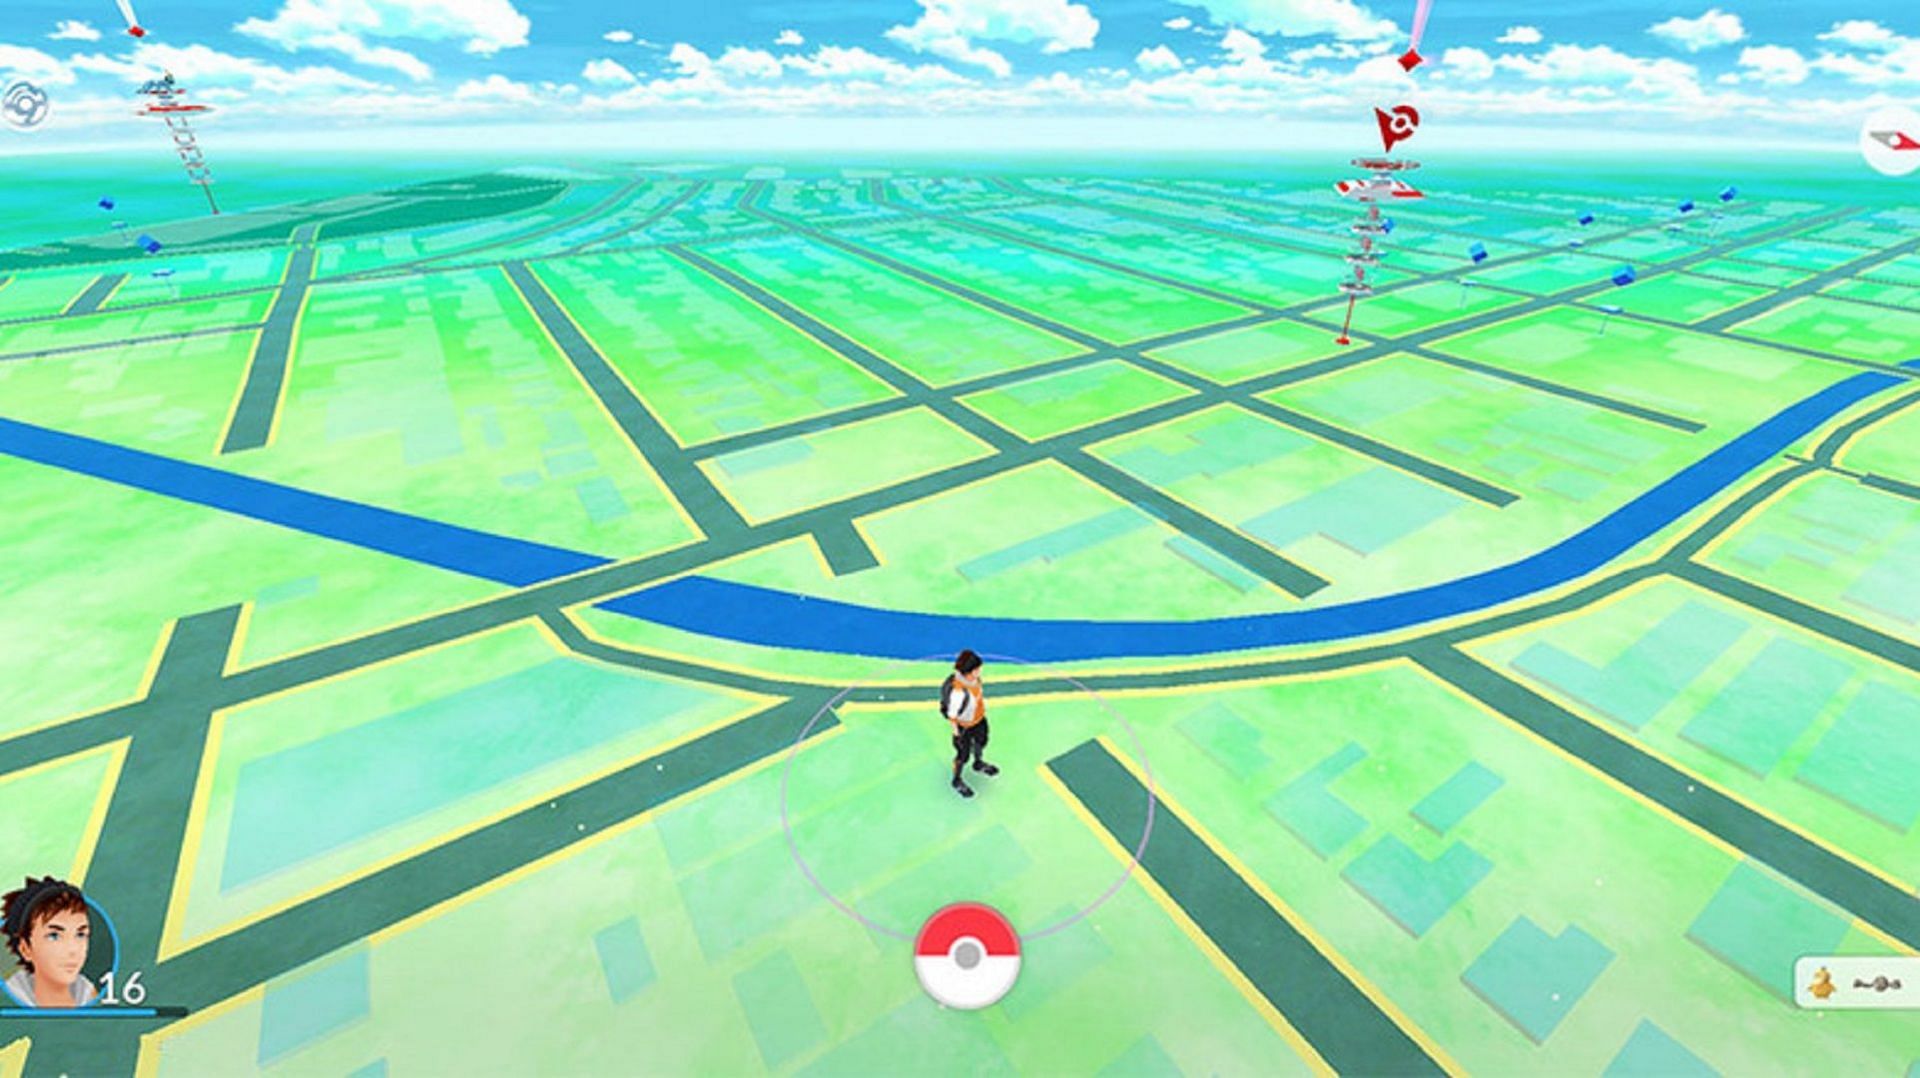 A relatively empty expanse is common for rural Pokemon GO players (Image via Niantic)